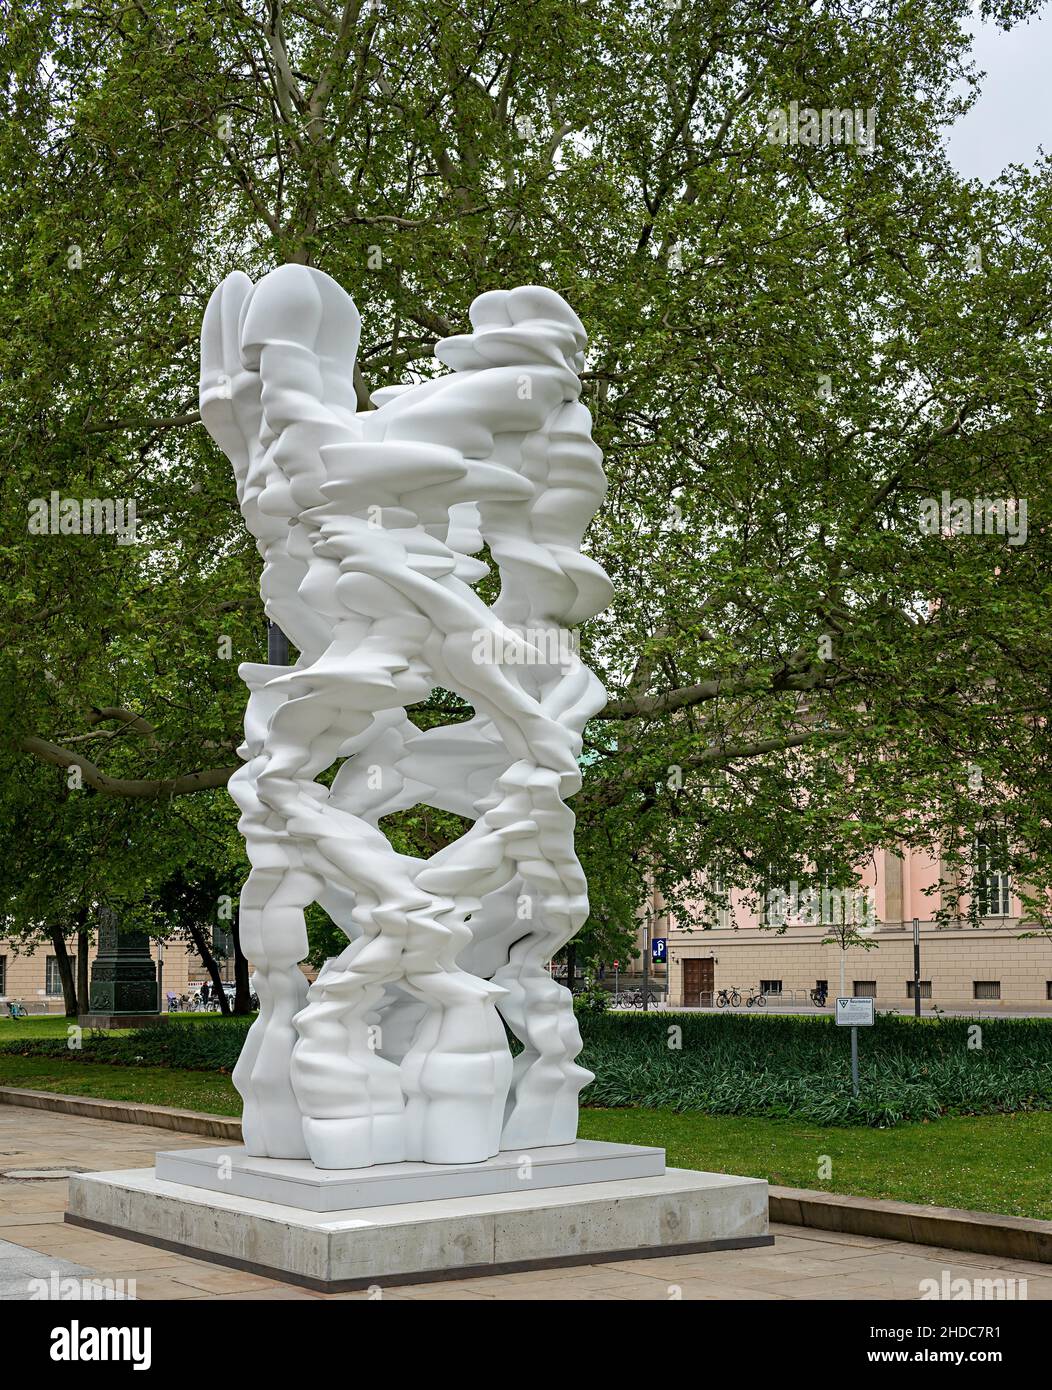 The sculpture 'Runner' by Tony Cragg in front of the entrance to the Palais Populaire at Bebelplatz Unter den Linden in Berlin, Germany, Europe Stock Photo